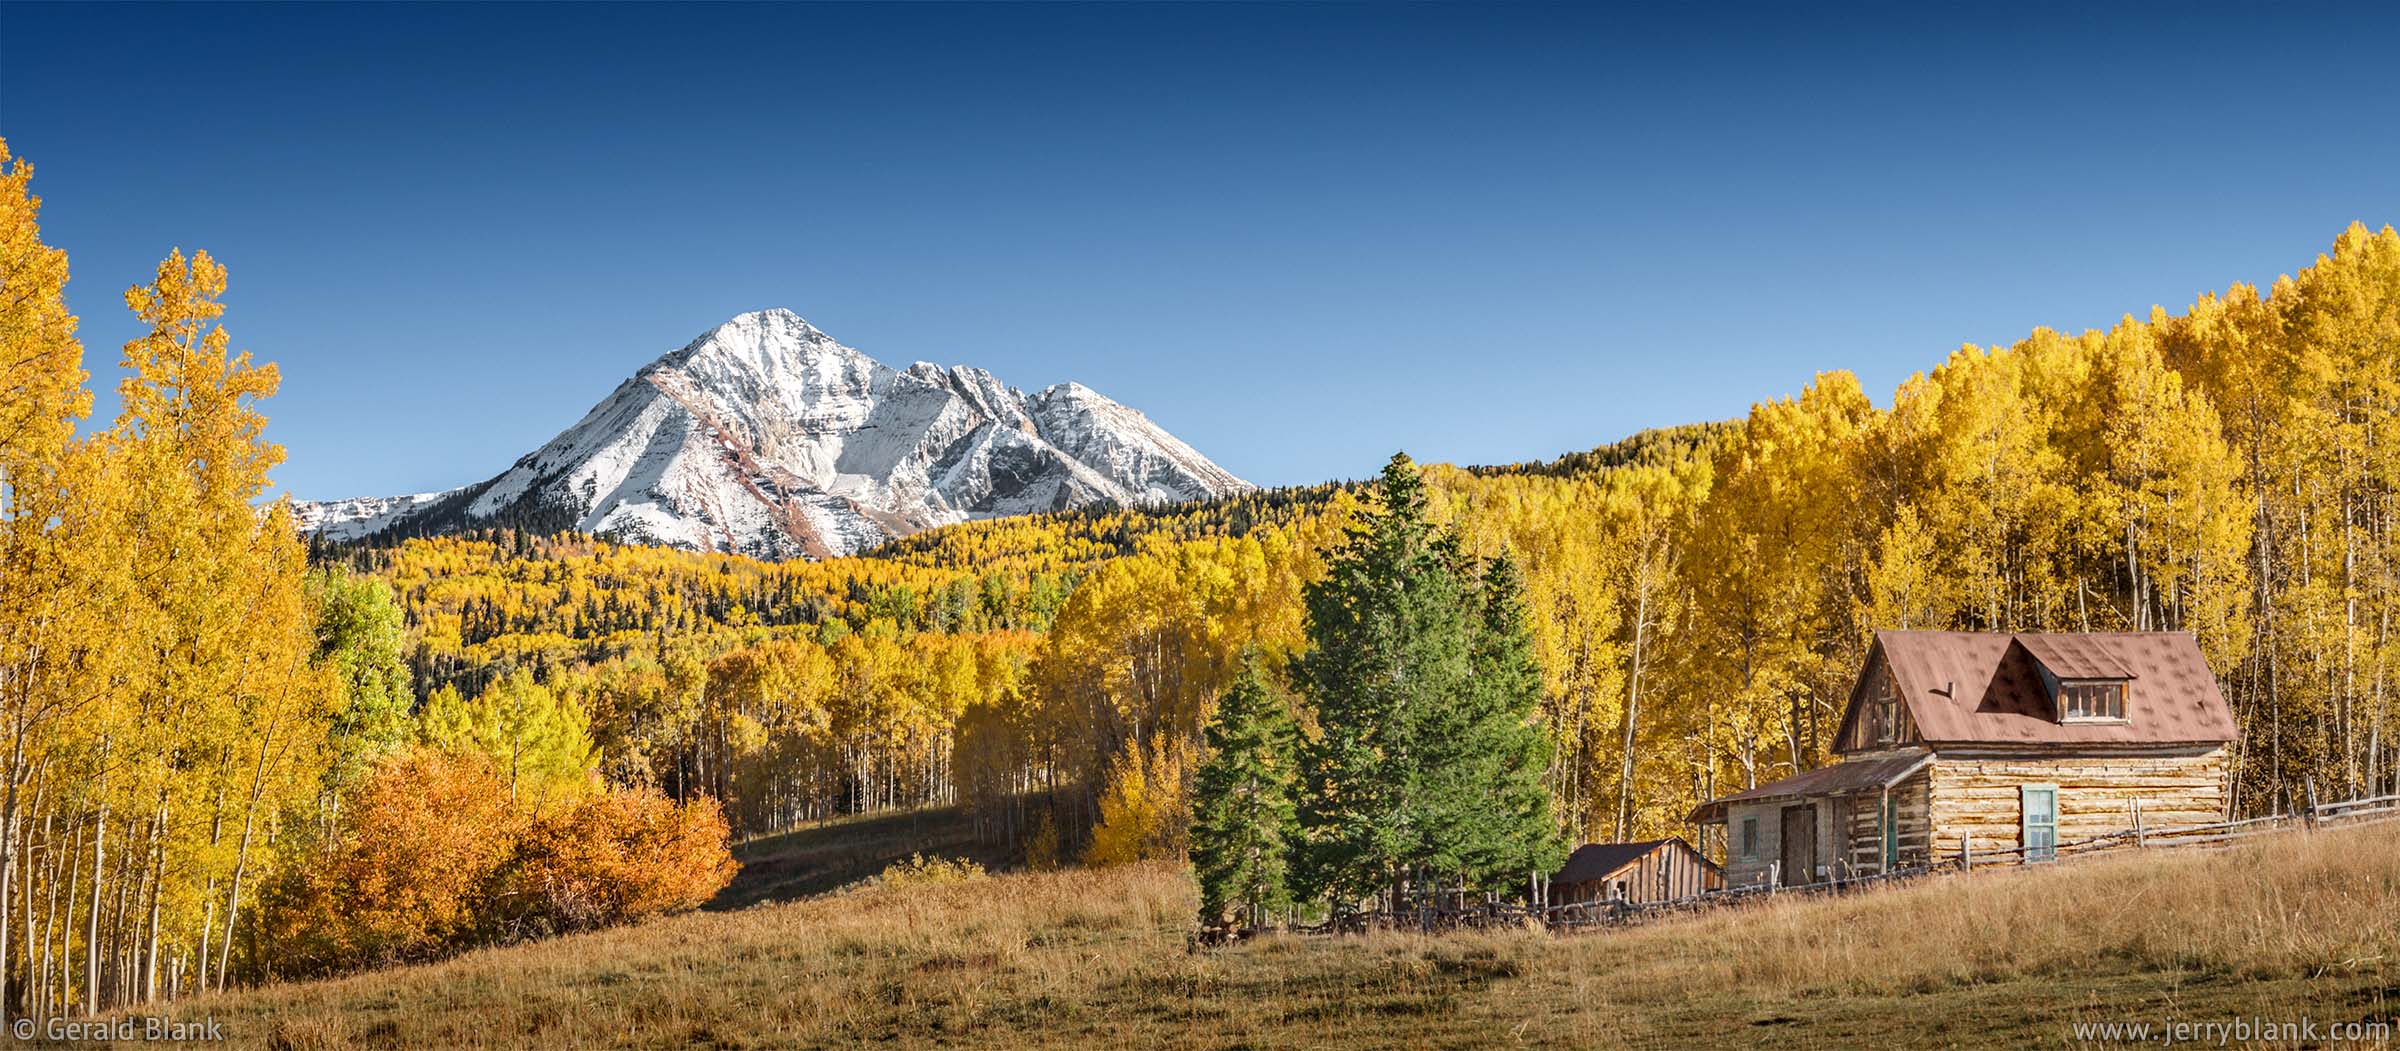 #07036 - Autumn view of Sunshine Mountain from old cabin on Wilson Mesa, southwest of Telluride, Colorado - photo by Jerry Blank